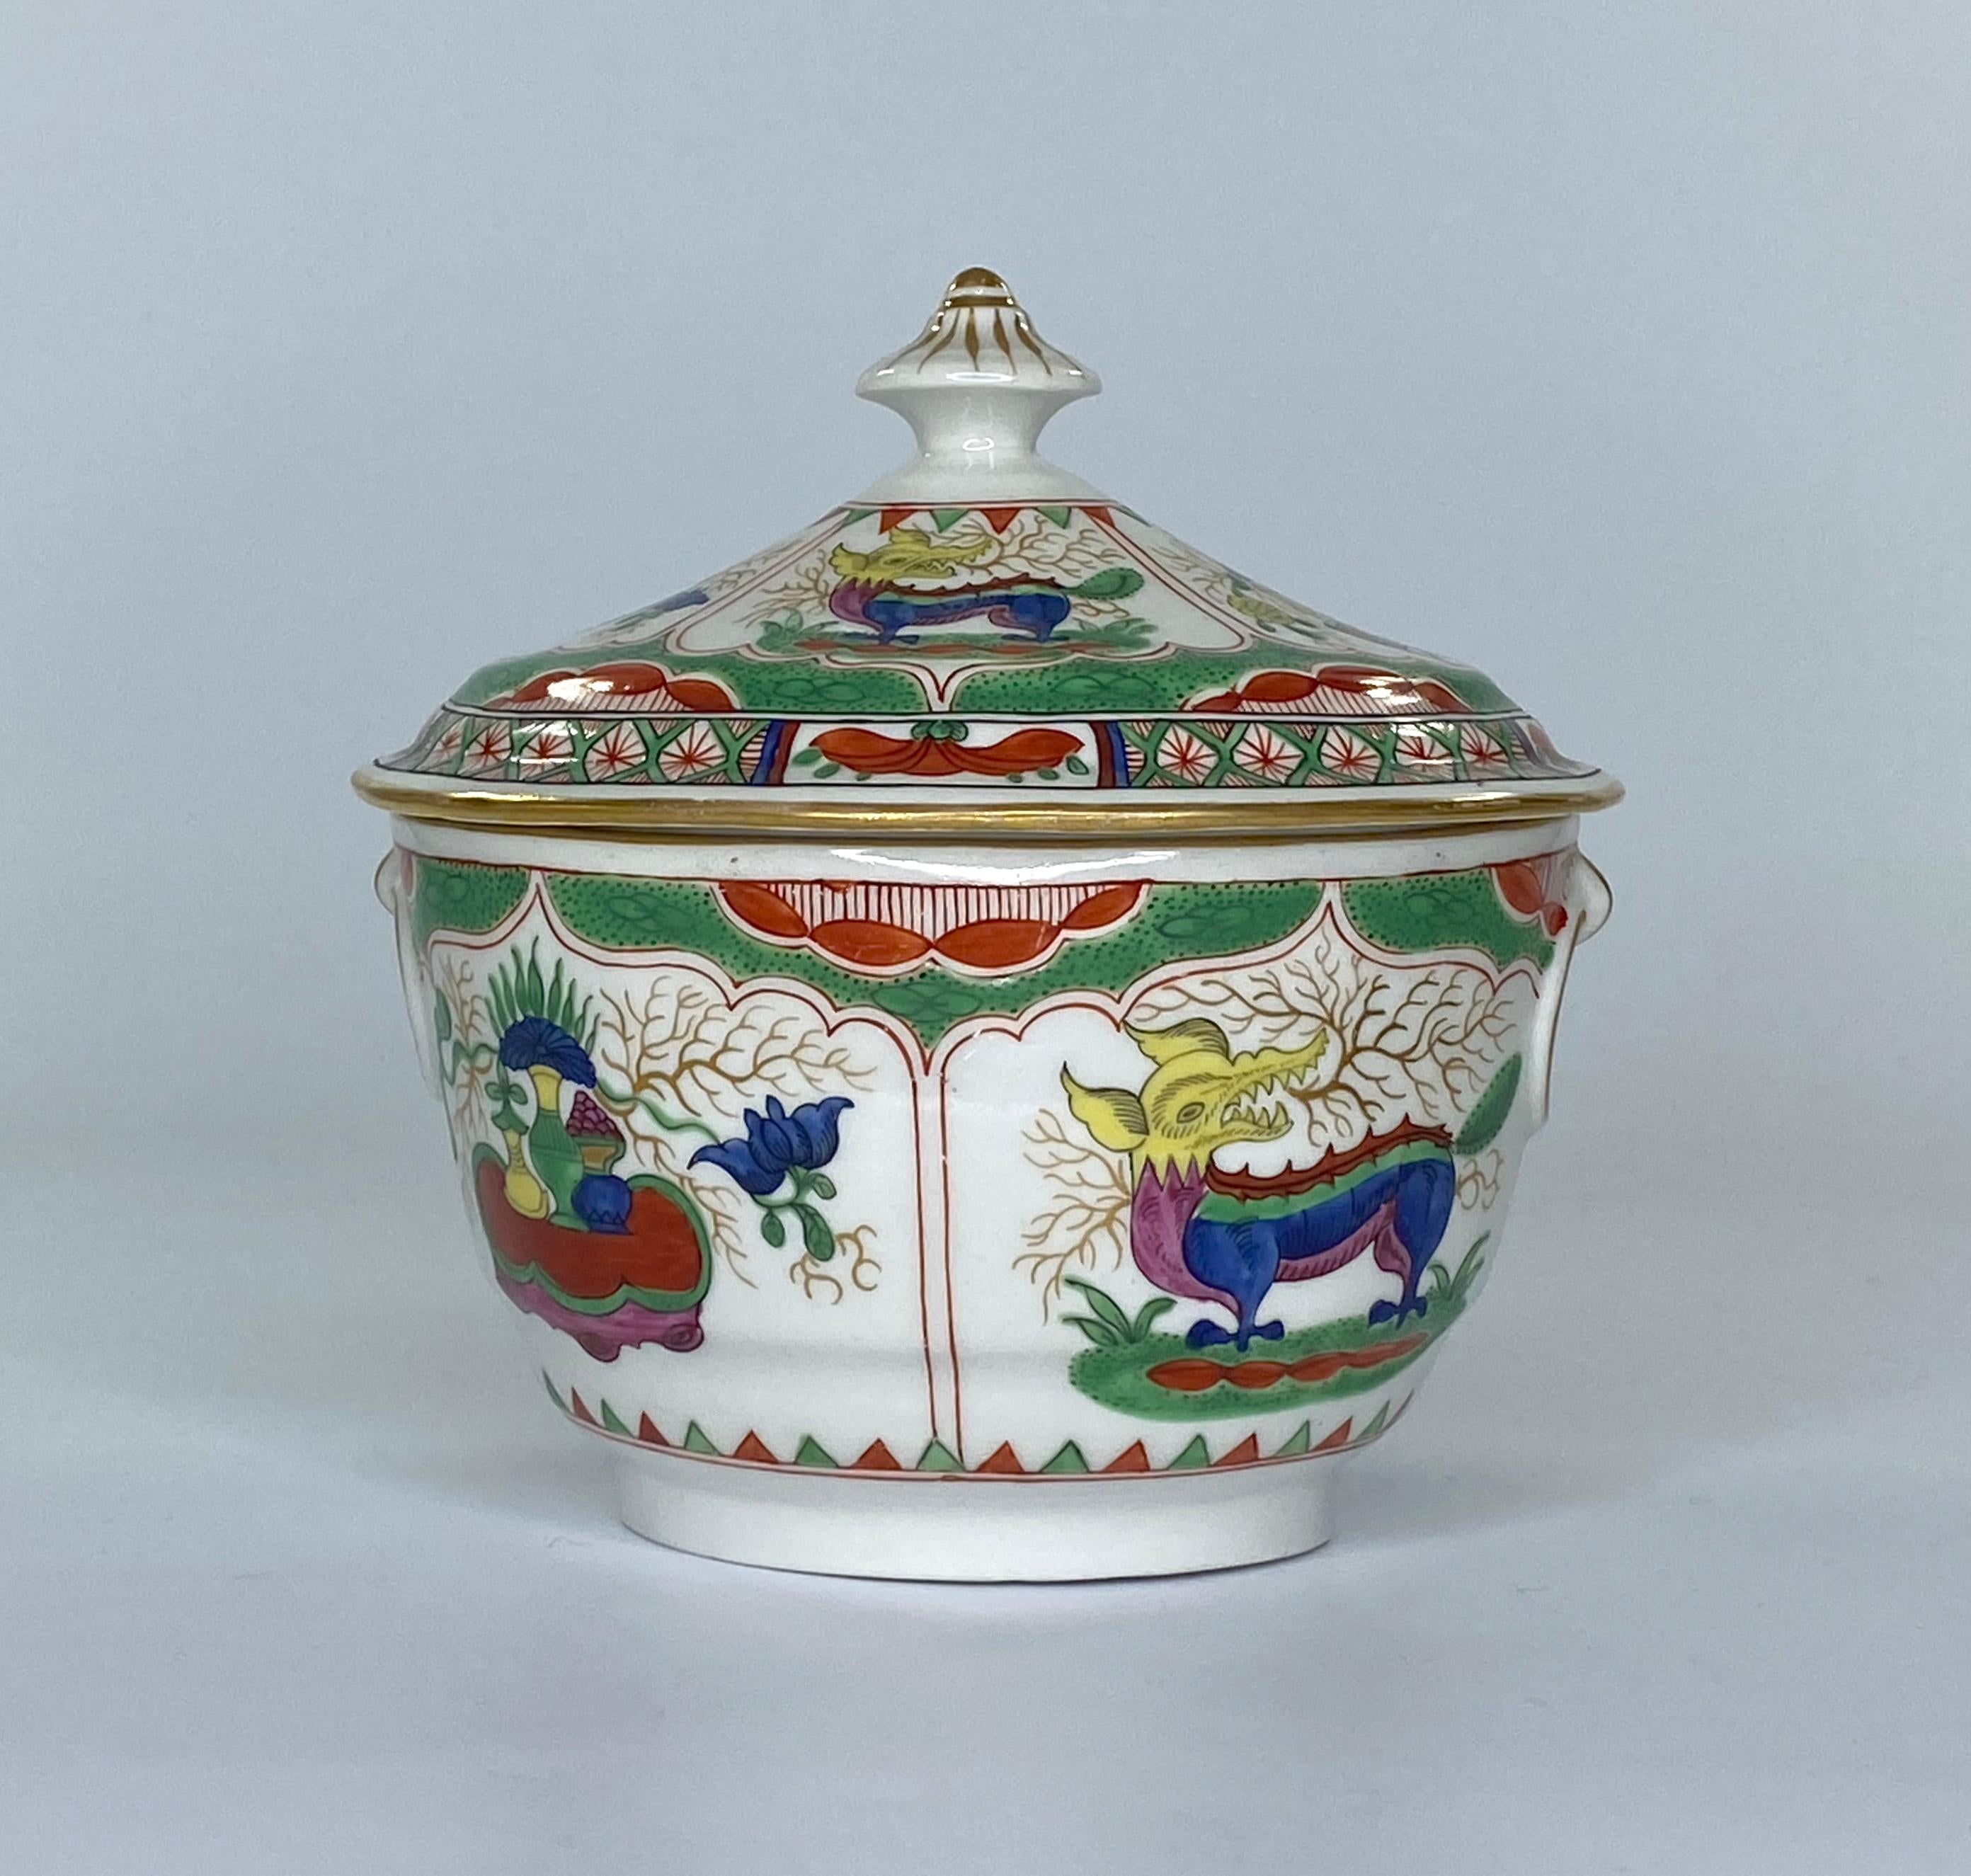 English Worcester Porcelain Sucrier, Dragons in Compartments, Barr Period, c. 1795